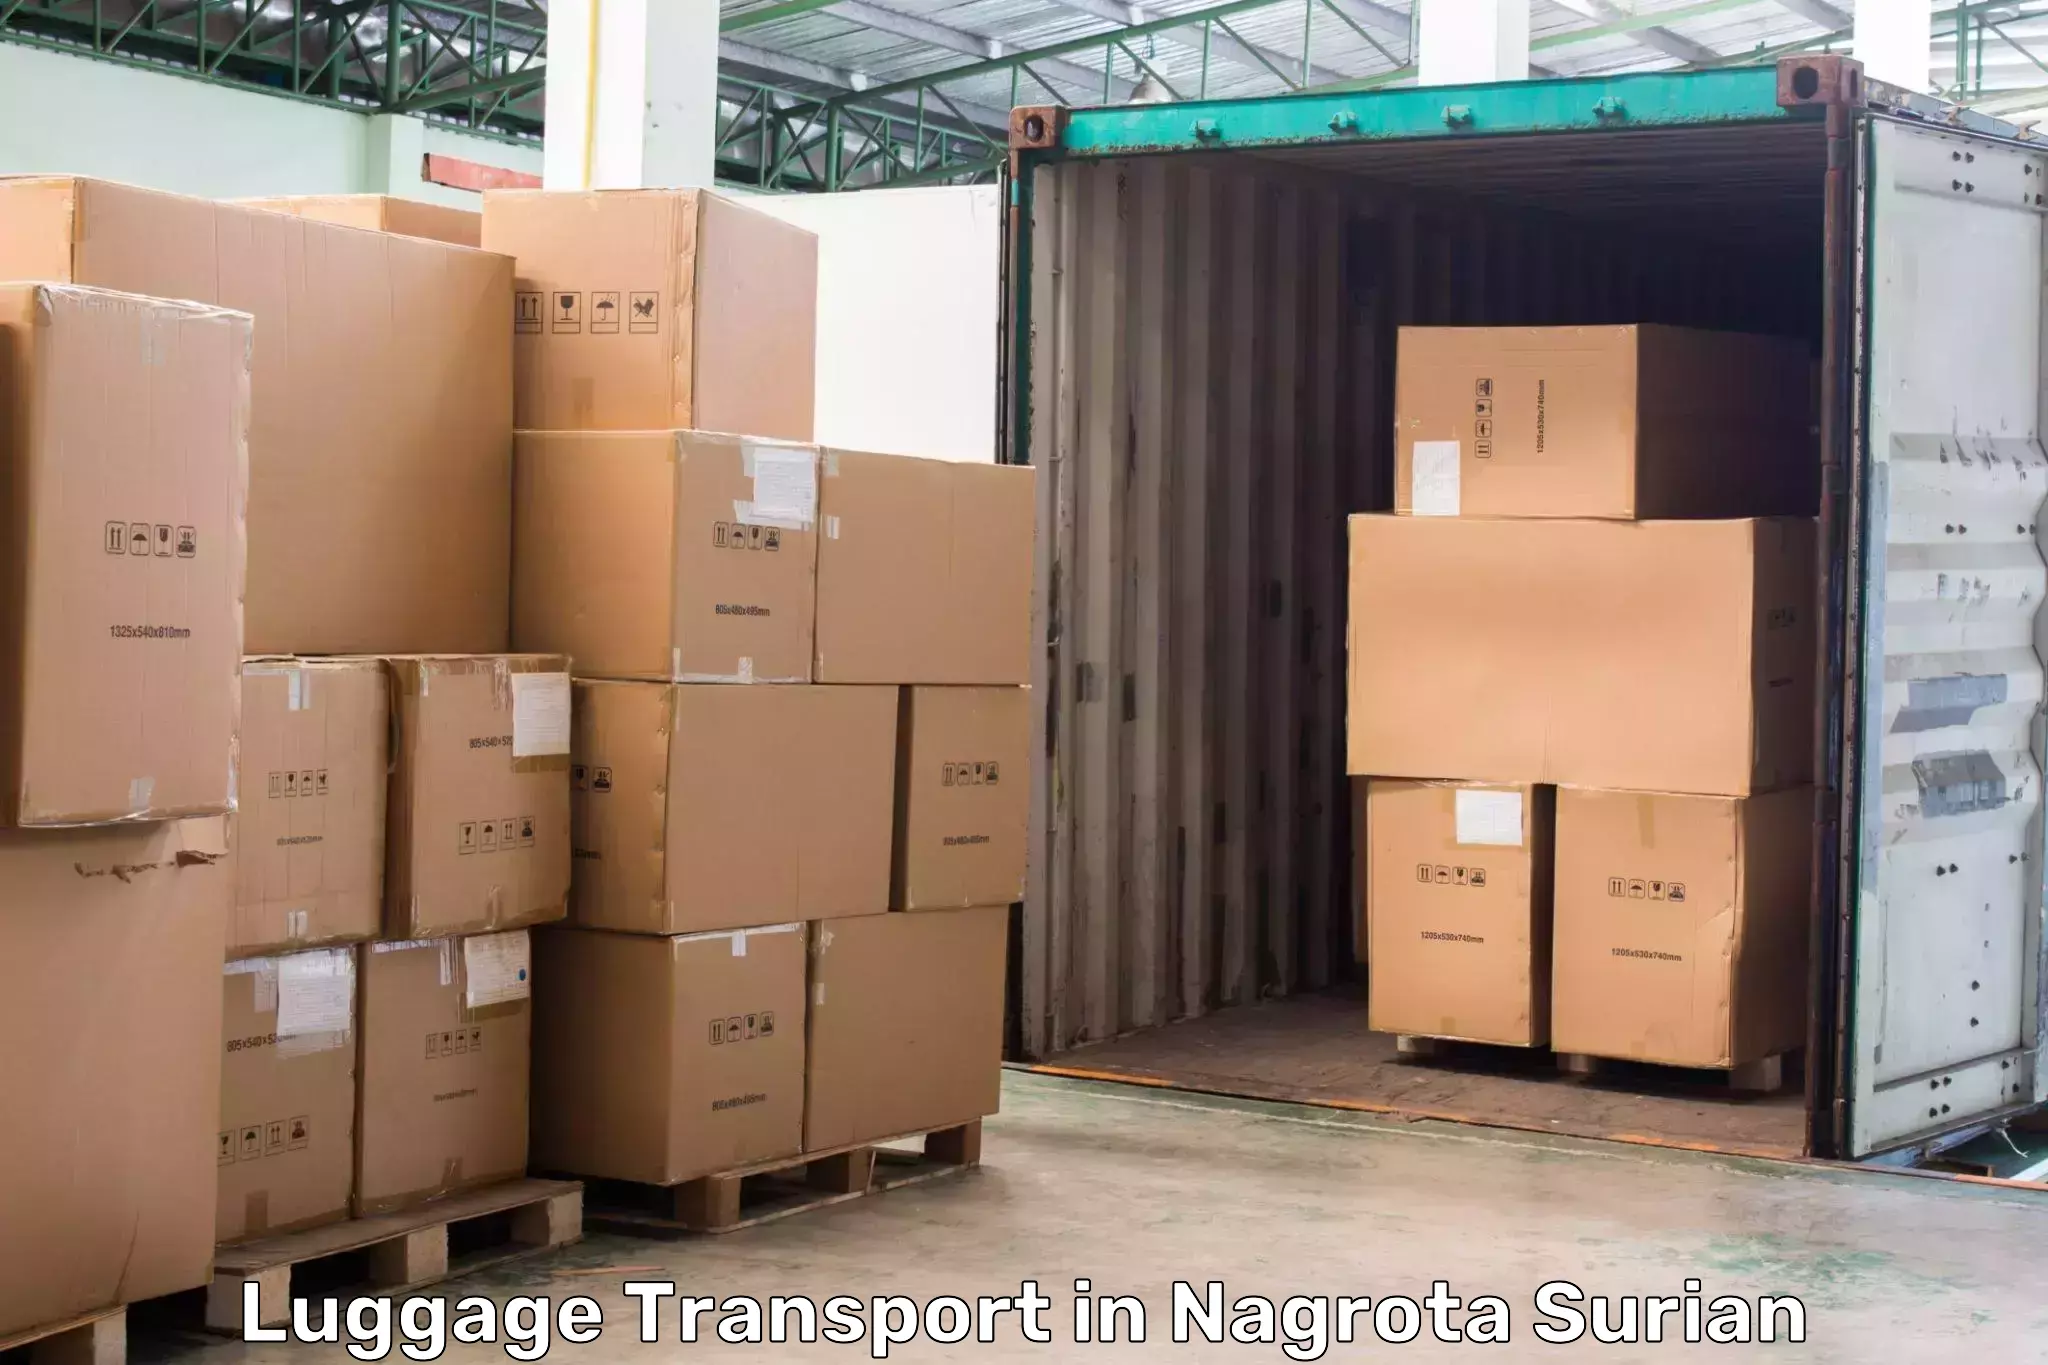 Automated luggage transport in Nagrota Surian